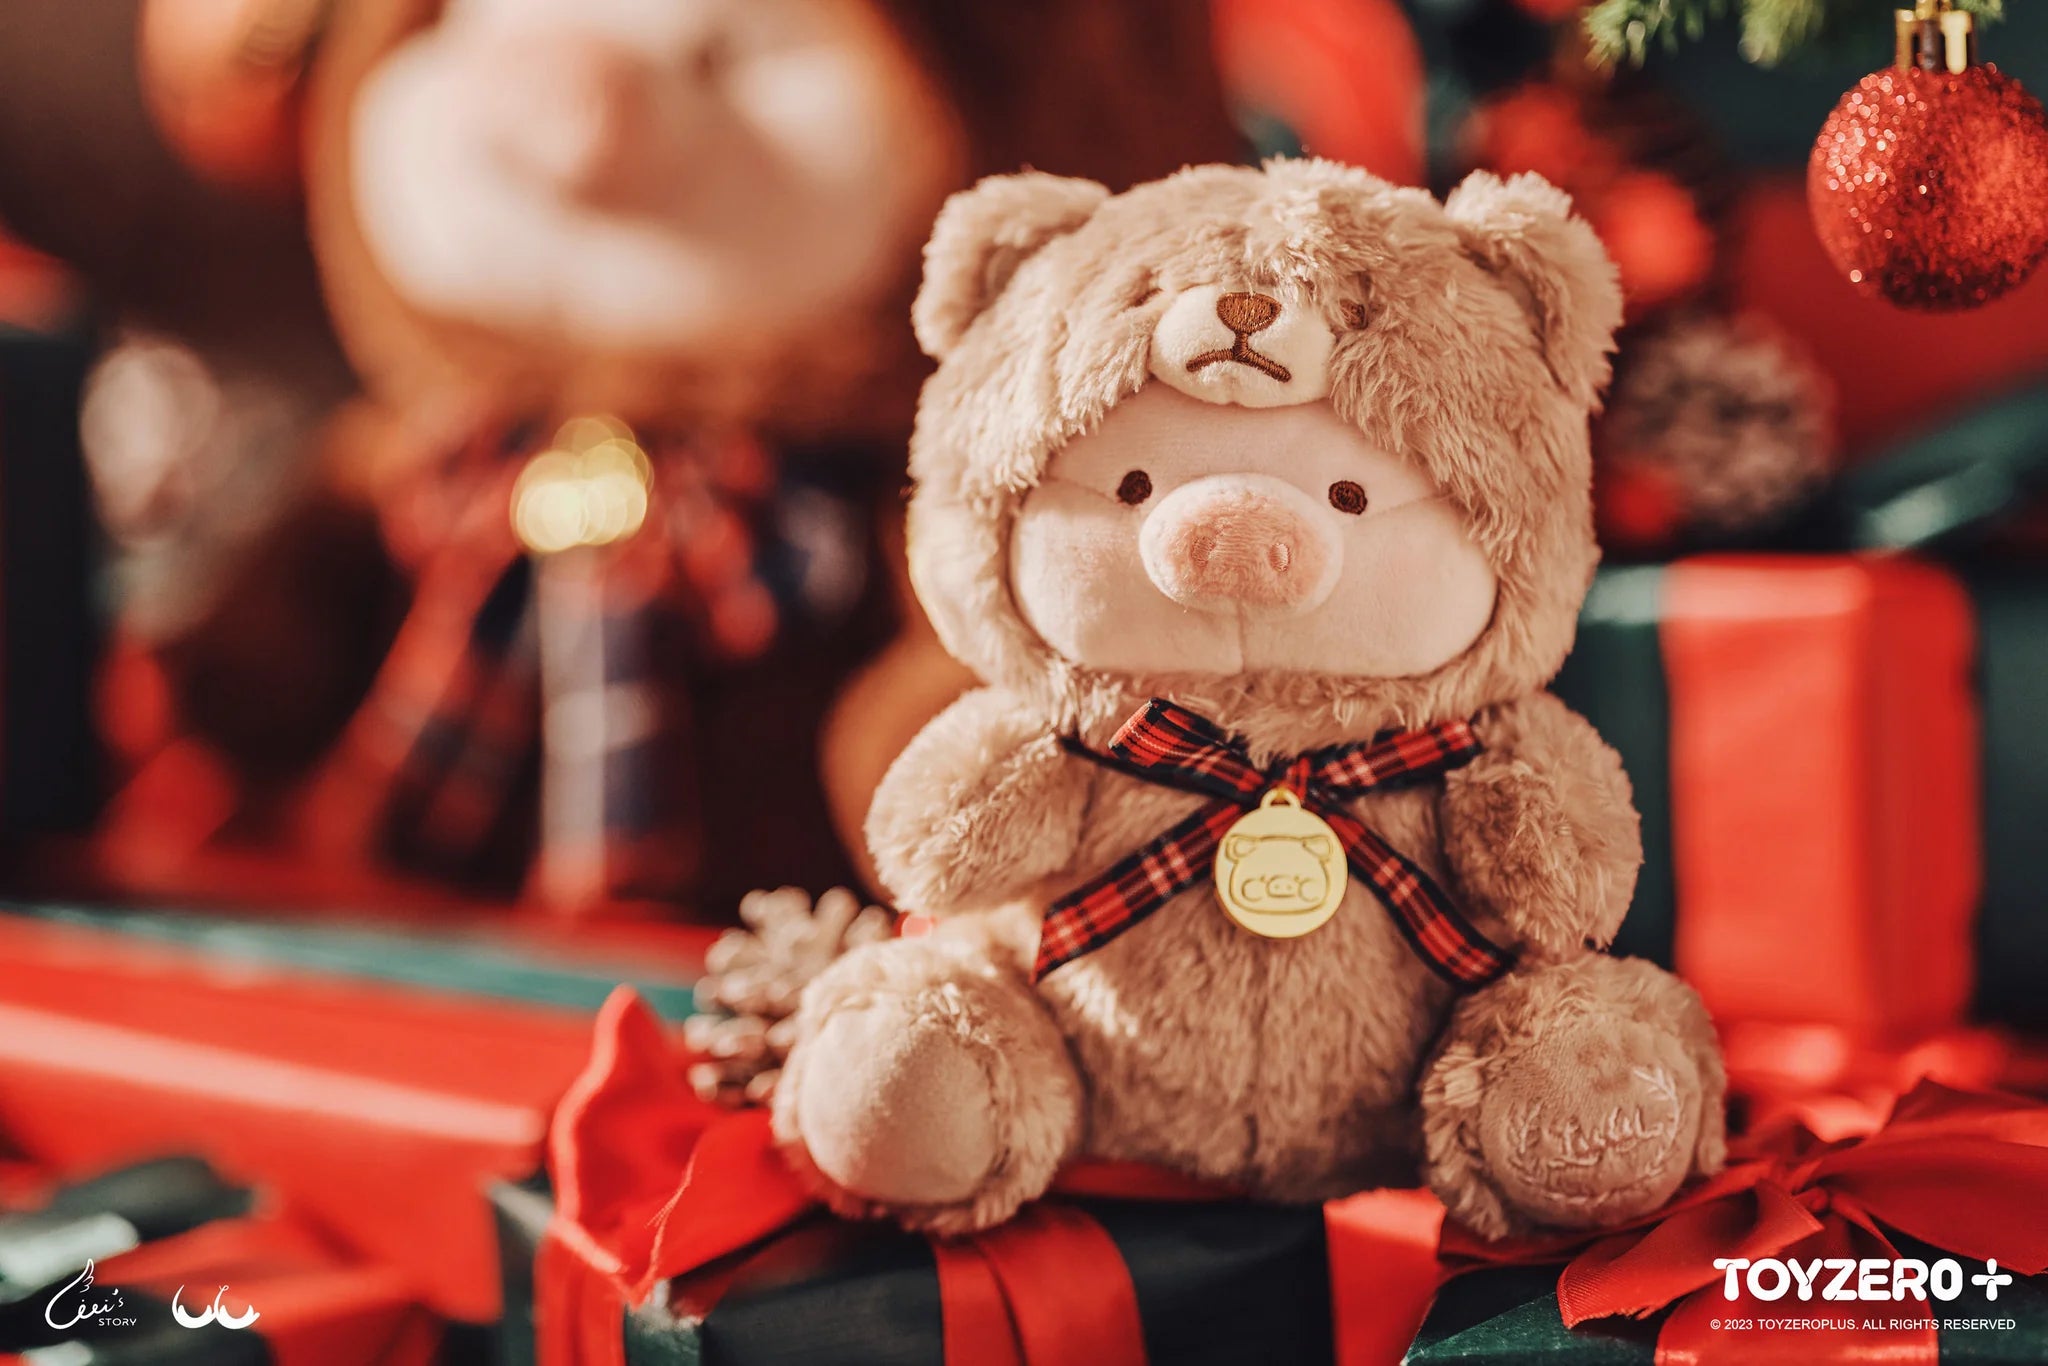 LuLu the Piggy plush teddy bear sitting on a present with a gold tag and a piggy coin medal.